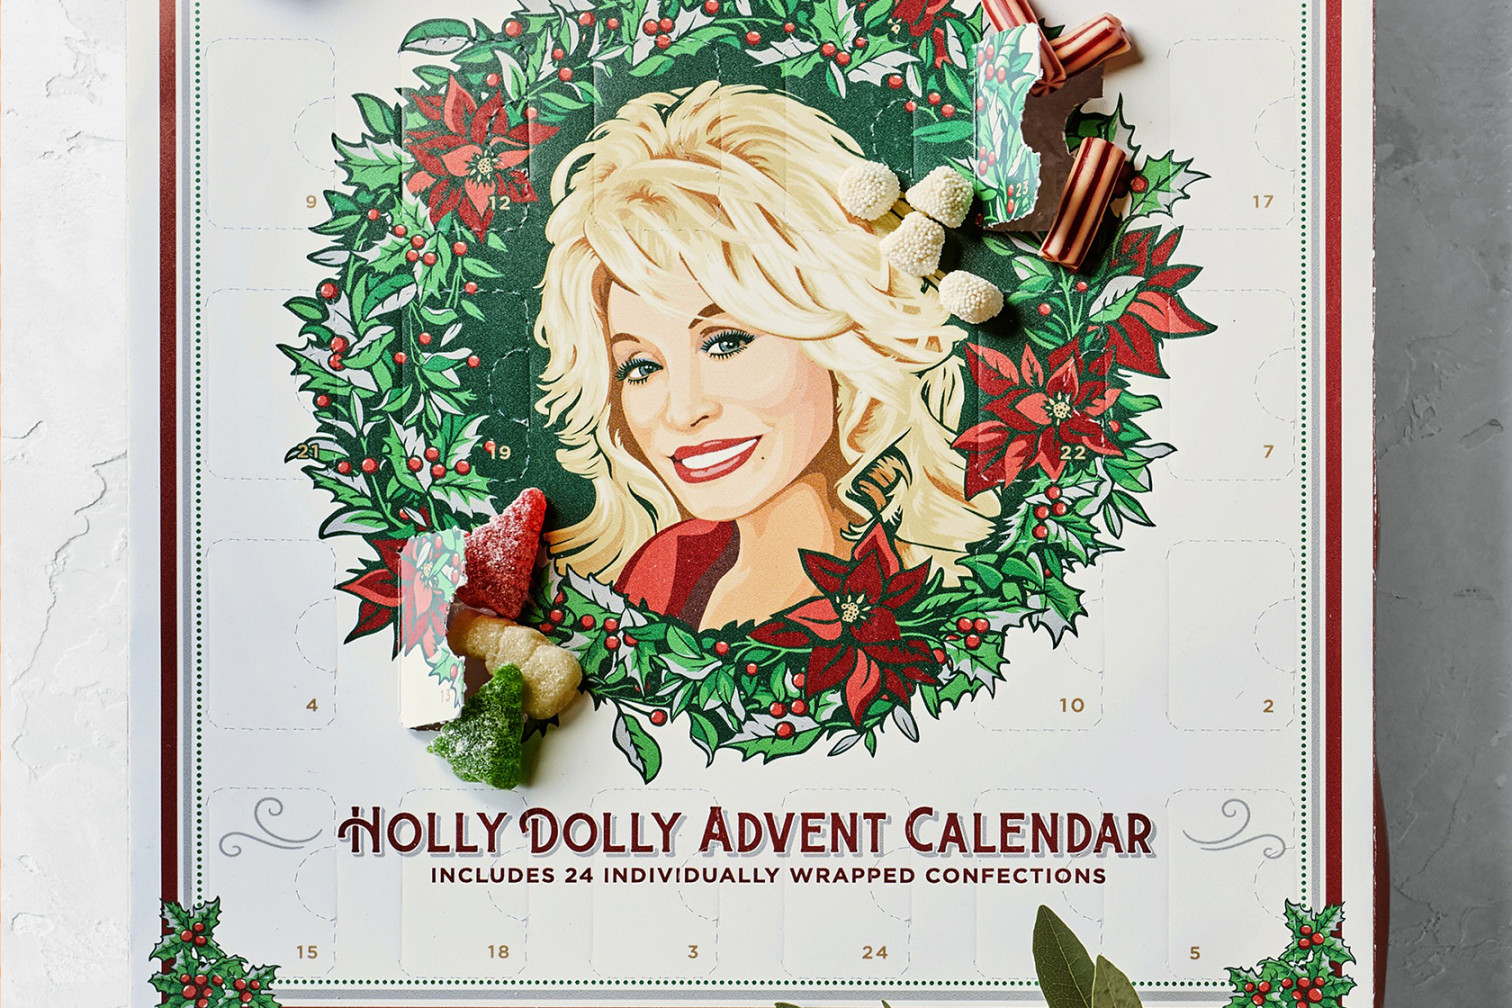 Count down to Christmas with Dolly Parton